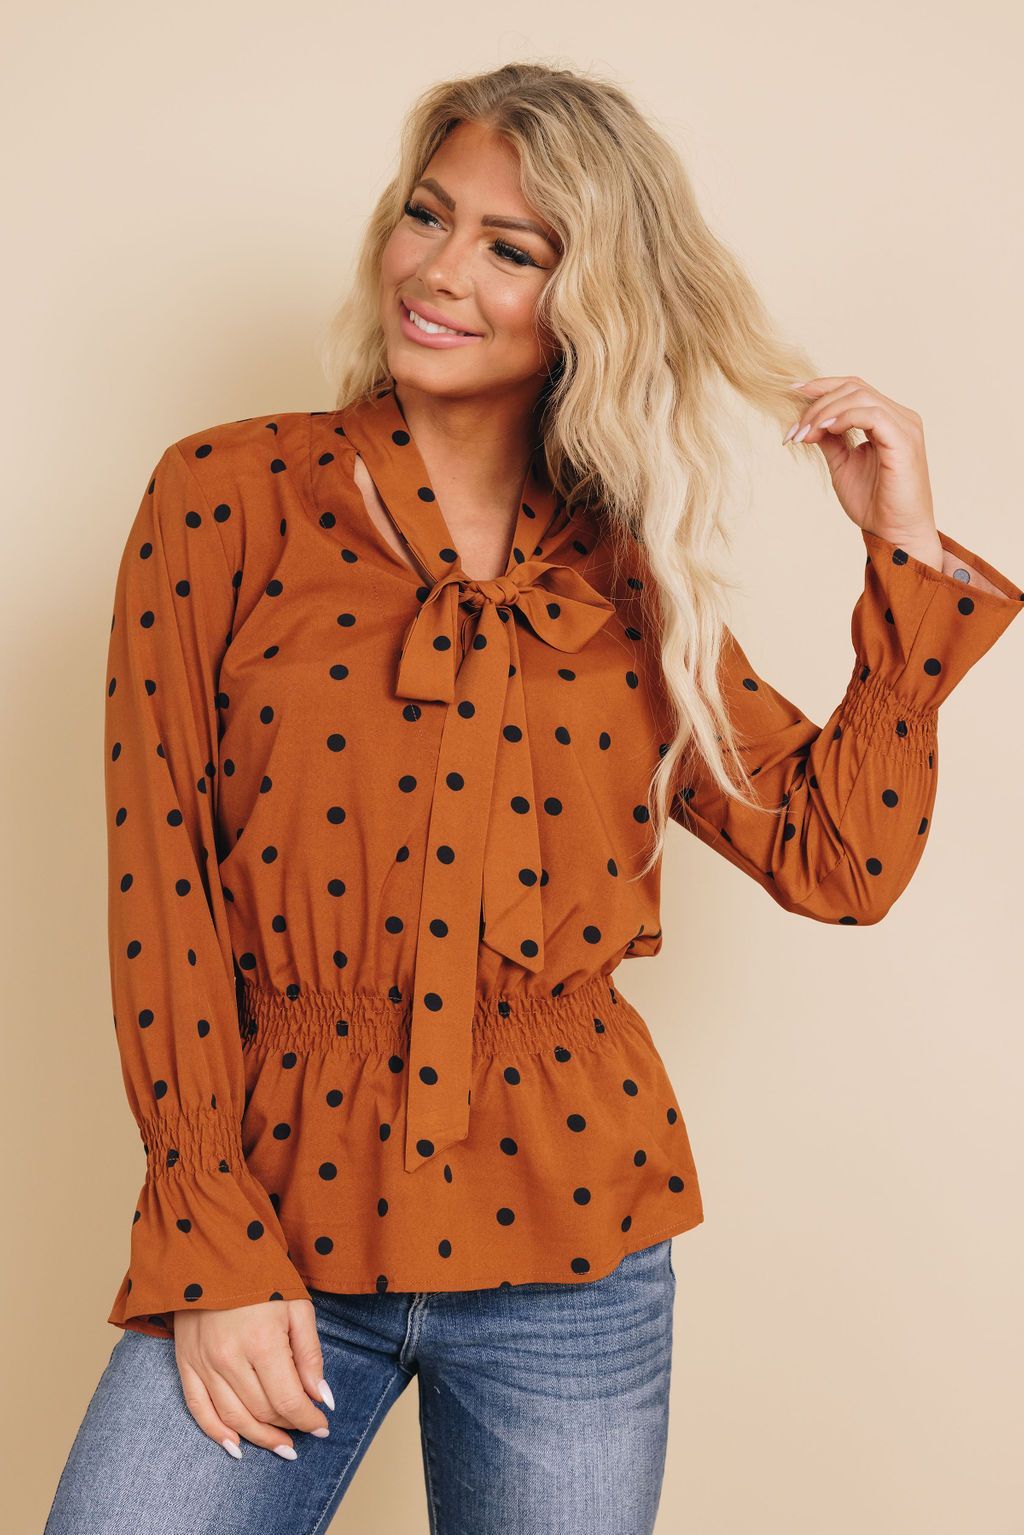 Excellence Polka Dot Tie Blouse